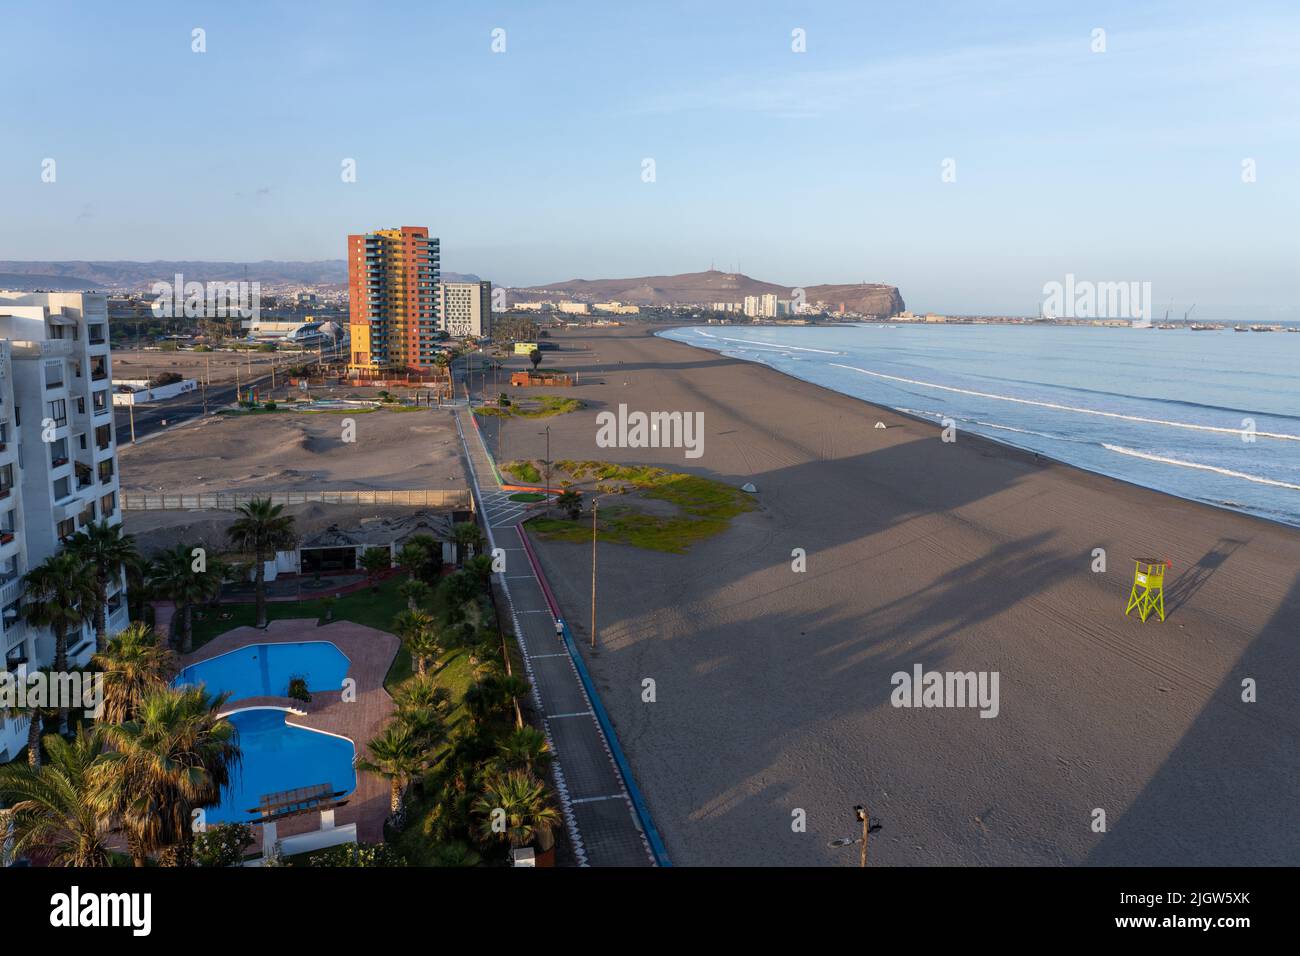 The deserted beach at sunrise in Arica, Chile with the El Morro hill in the background. Stock Photo